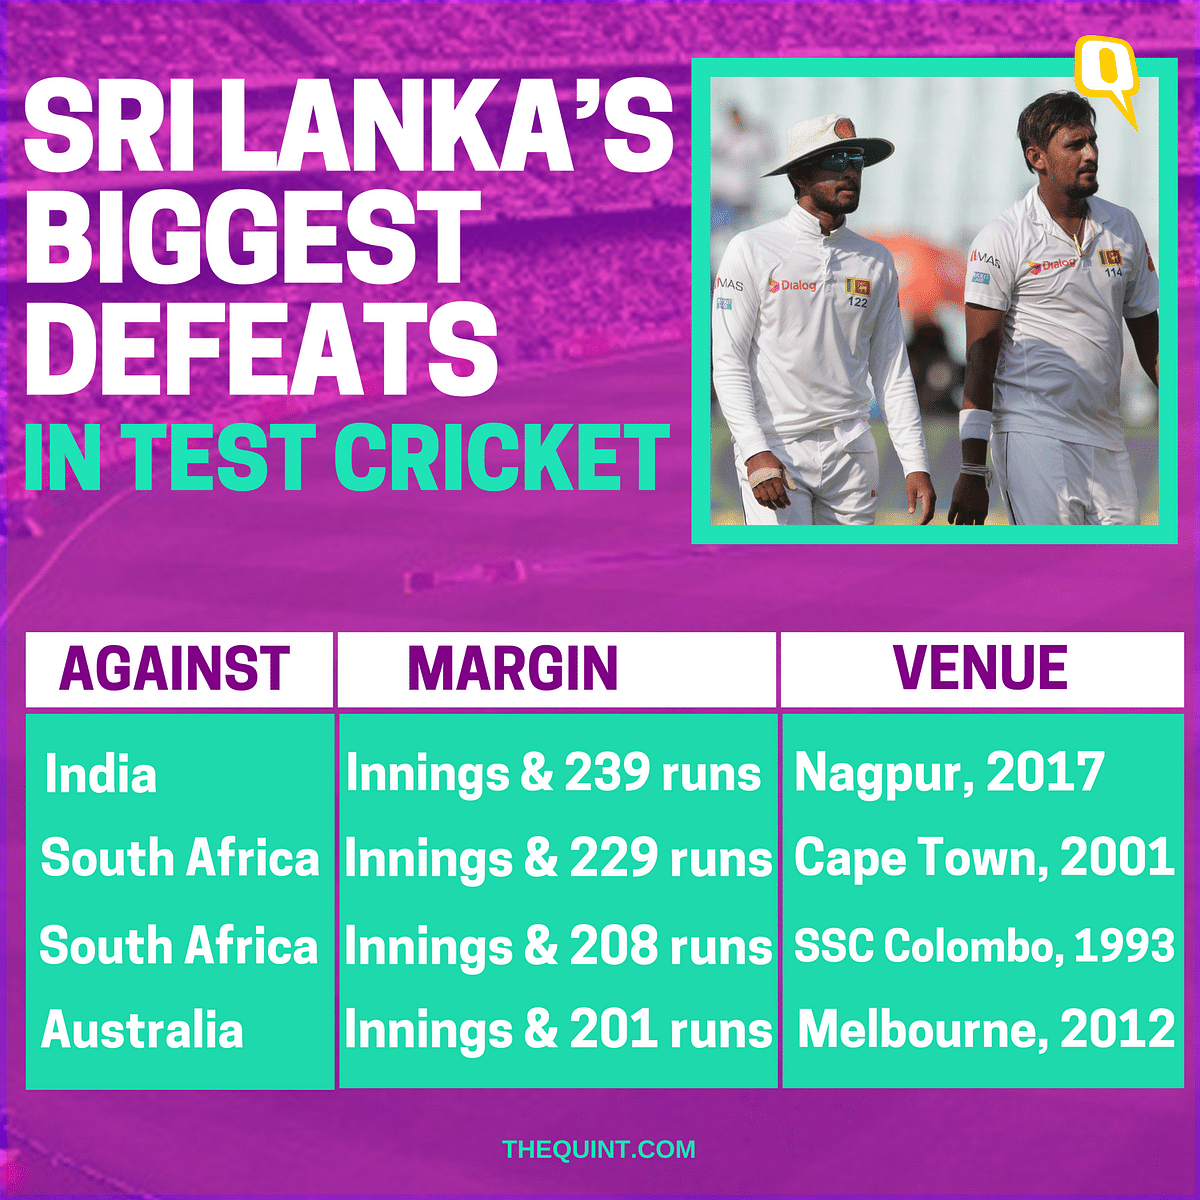 India’s win at Nagpur equalled the team’s record for its biggest victory in Test cricket.